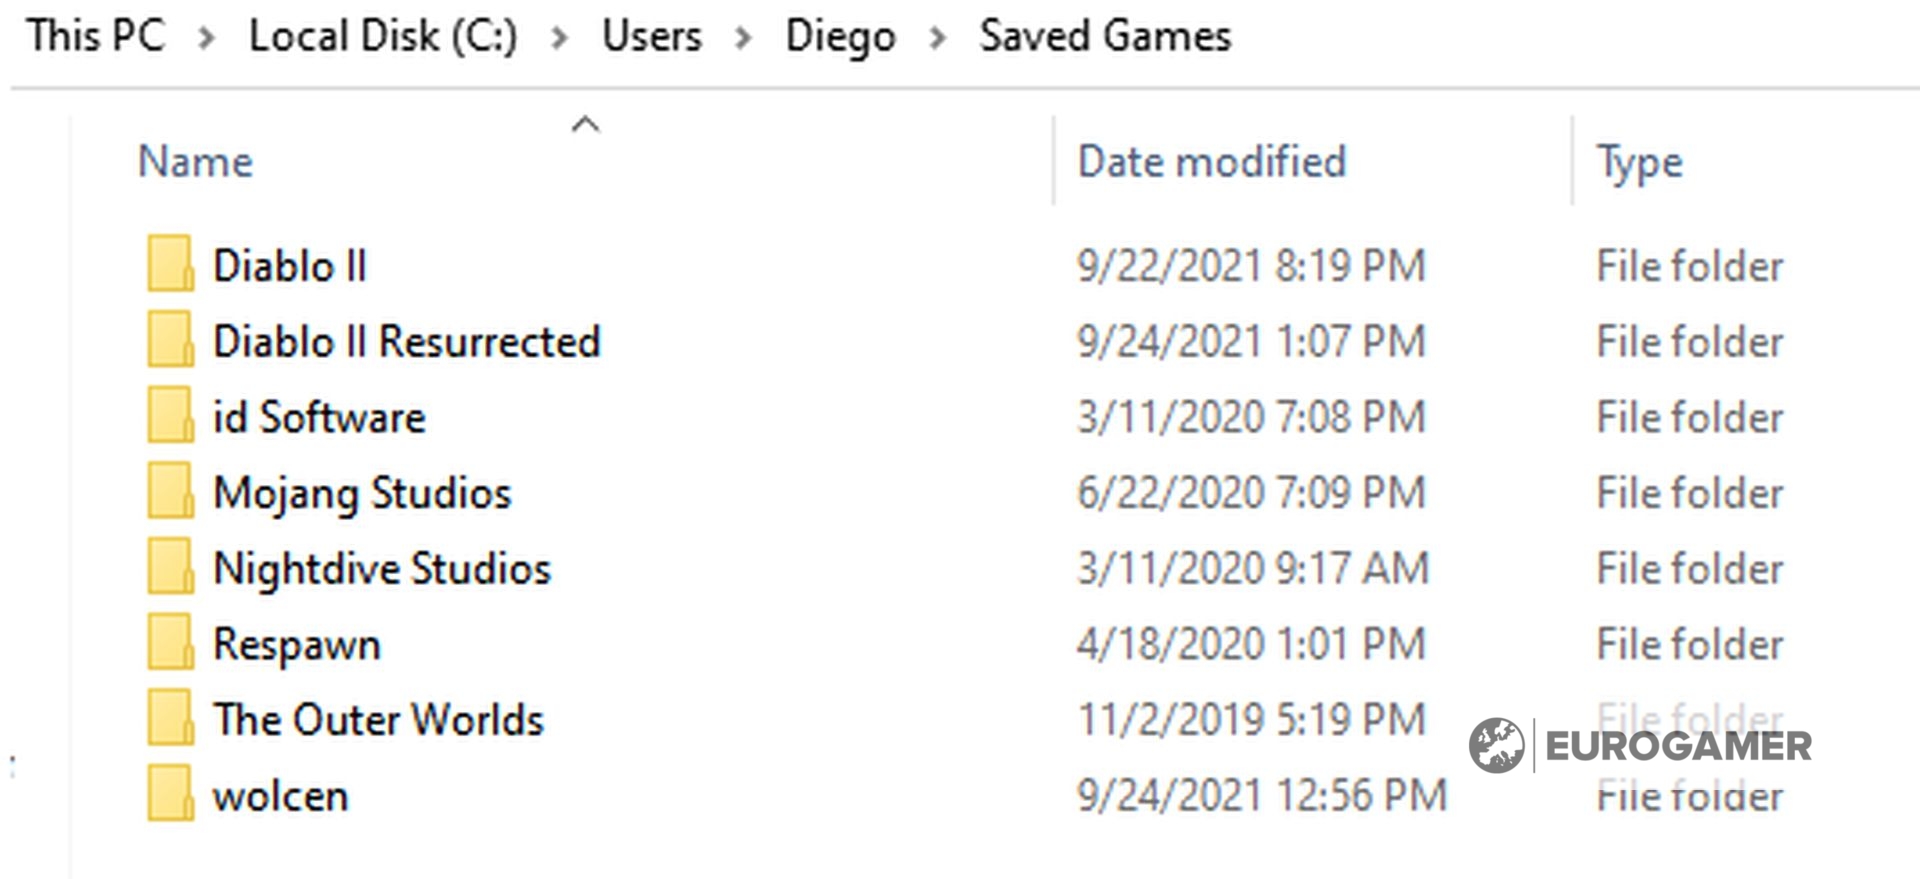 where does diablo 2 save its save game files